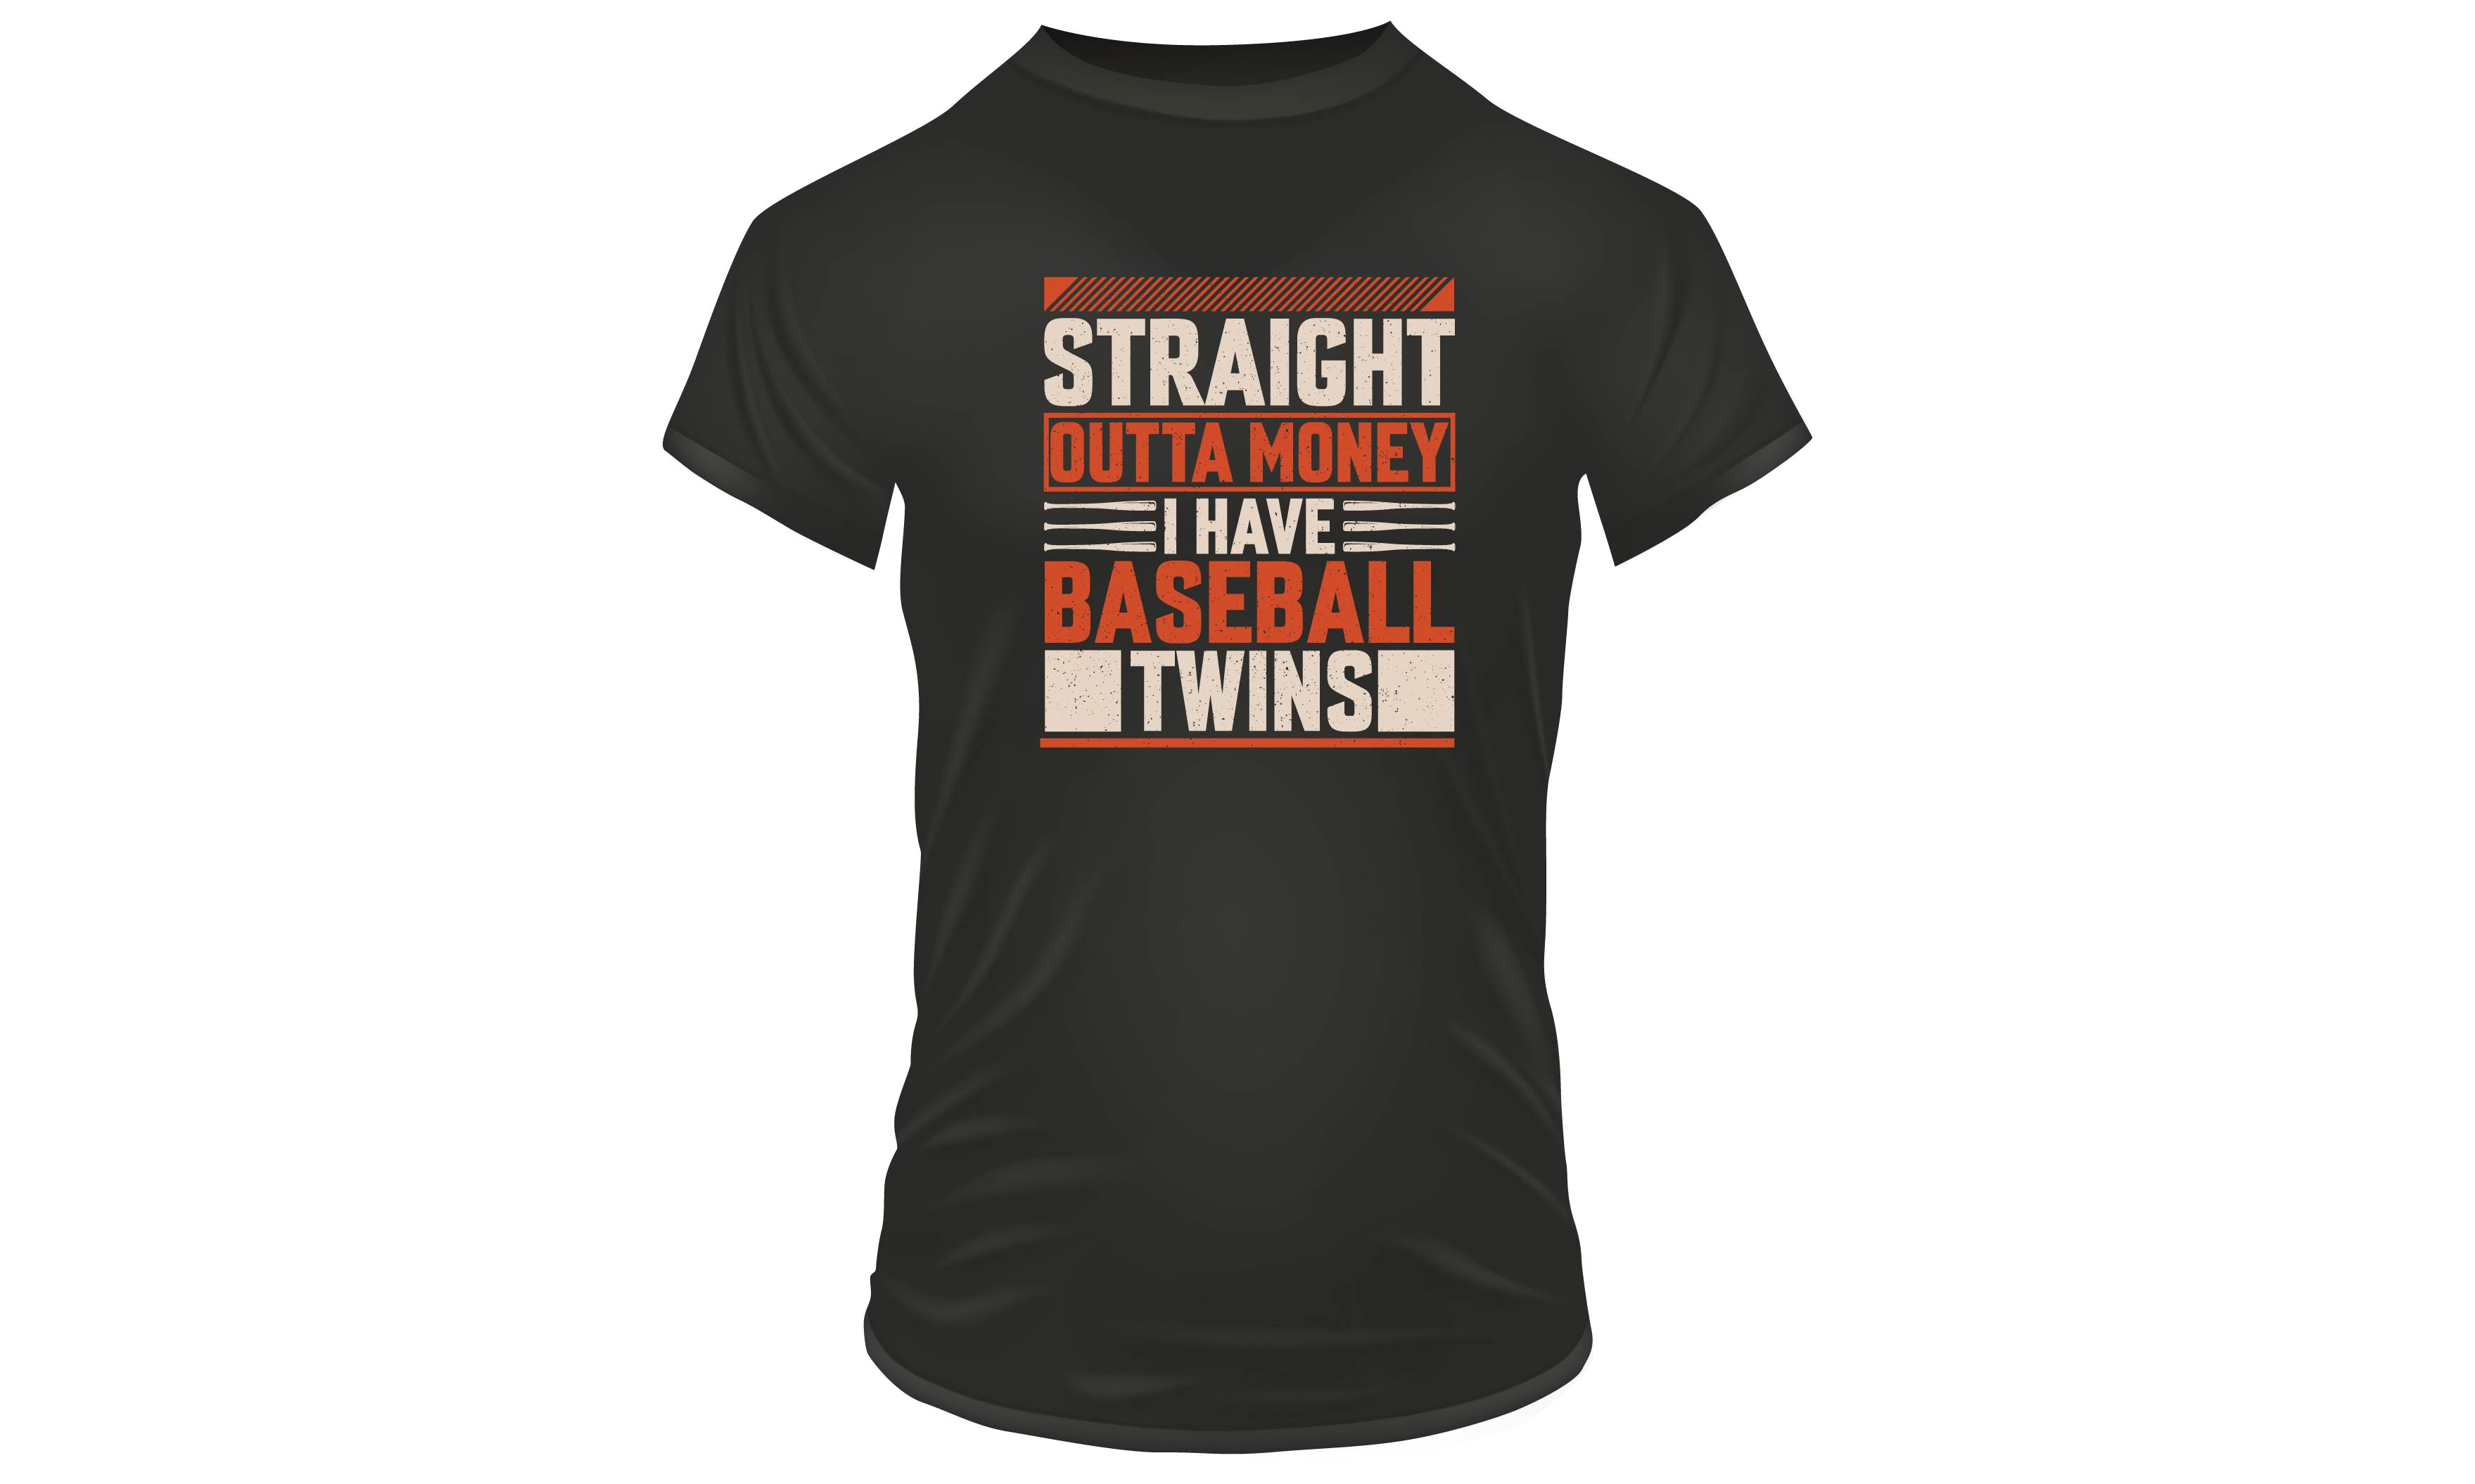 Black t - shirt that says straight out of the money i have baseball twins.